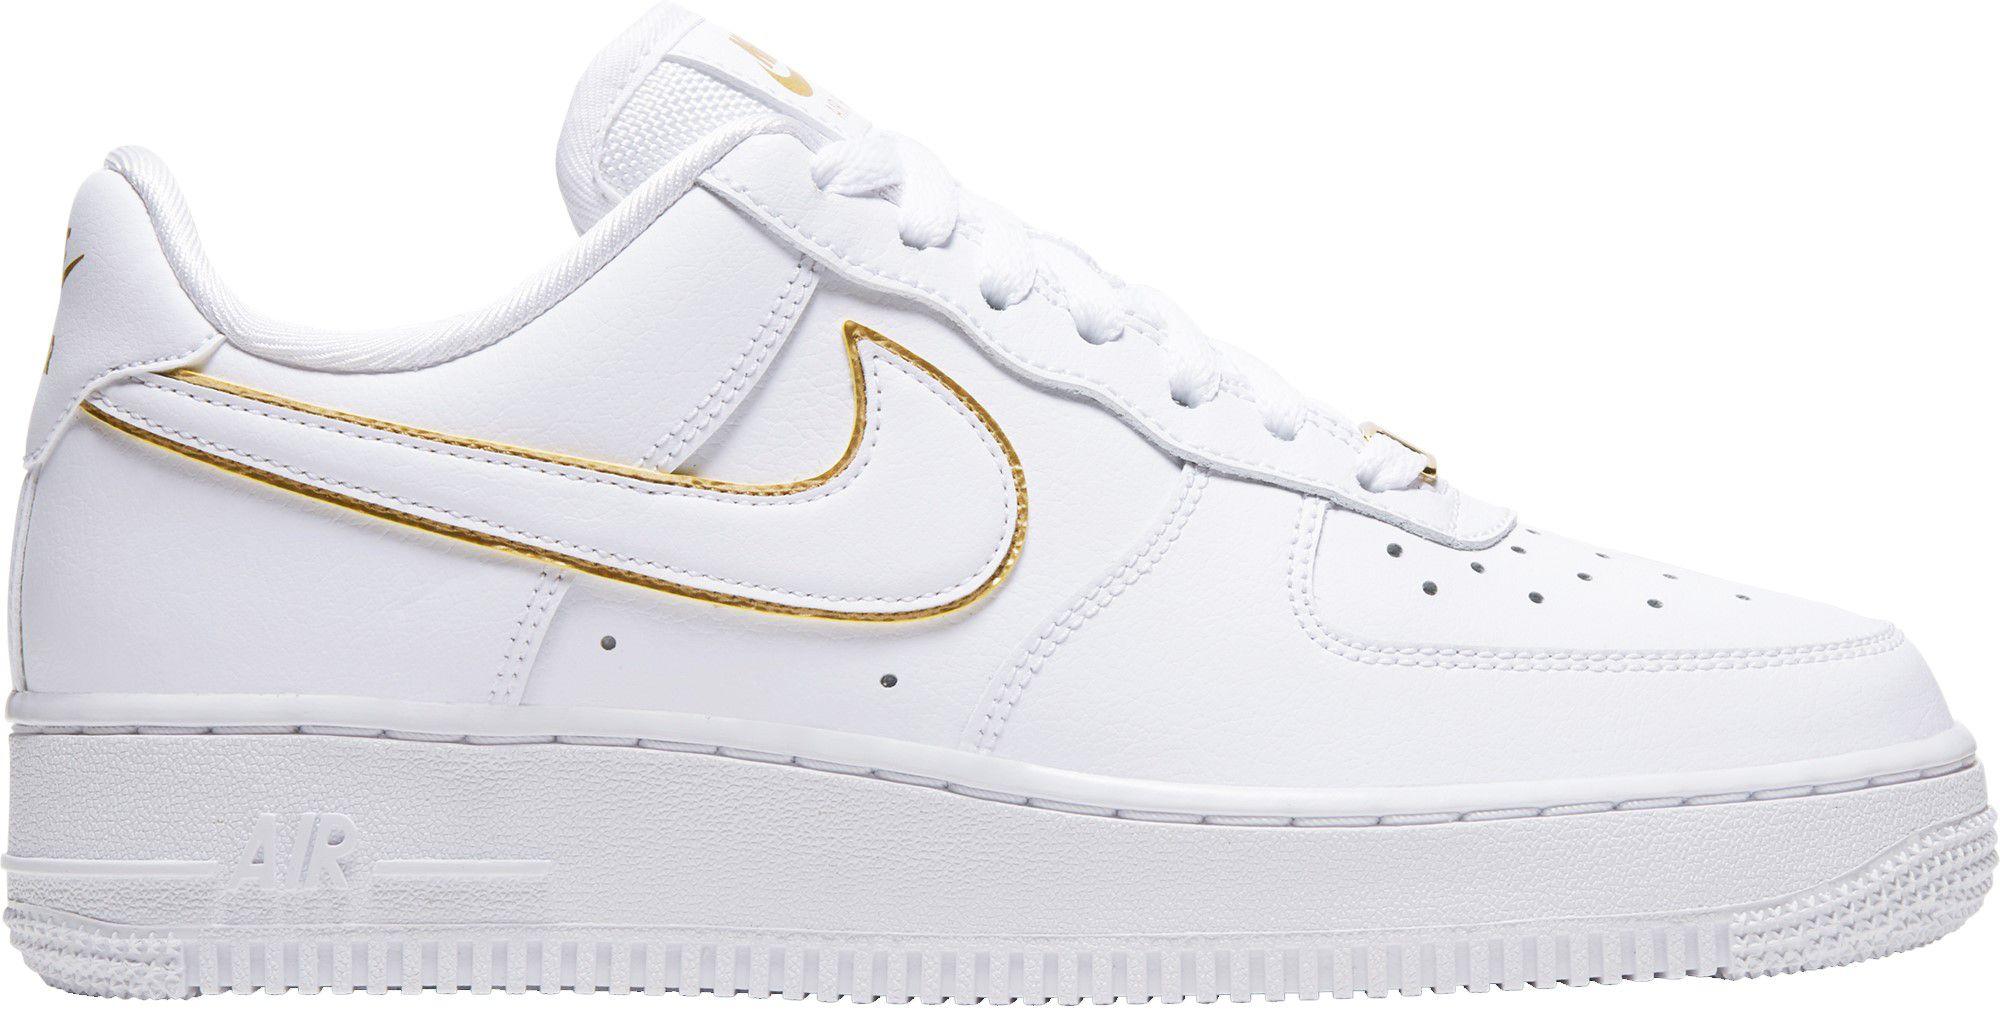 Nike Leather Air Force 1 '07 Essential Shoes in White/Metallic/Gold (White)  - Lyst